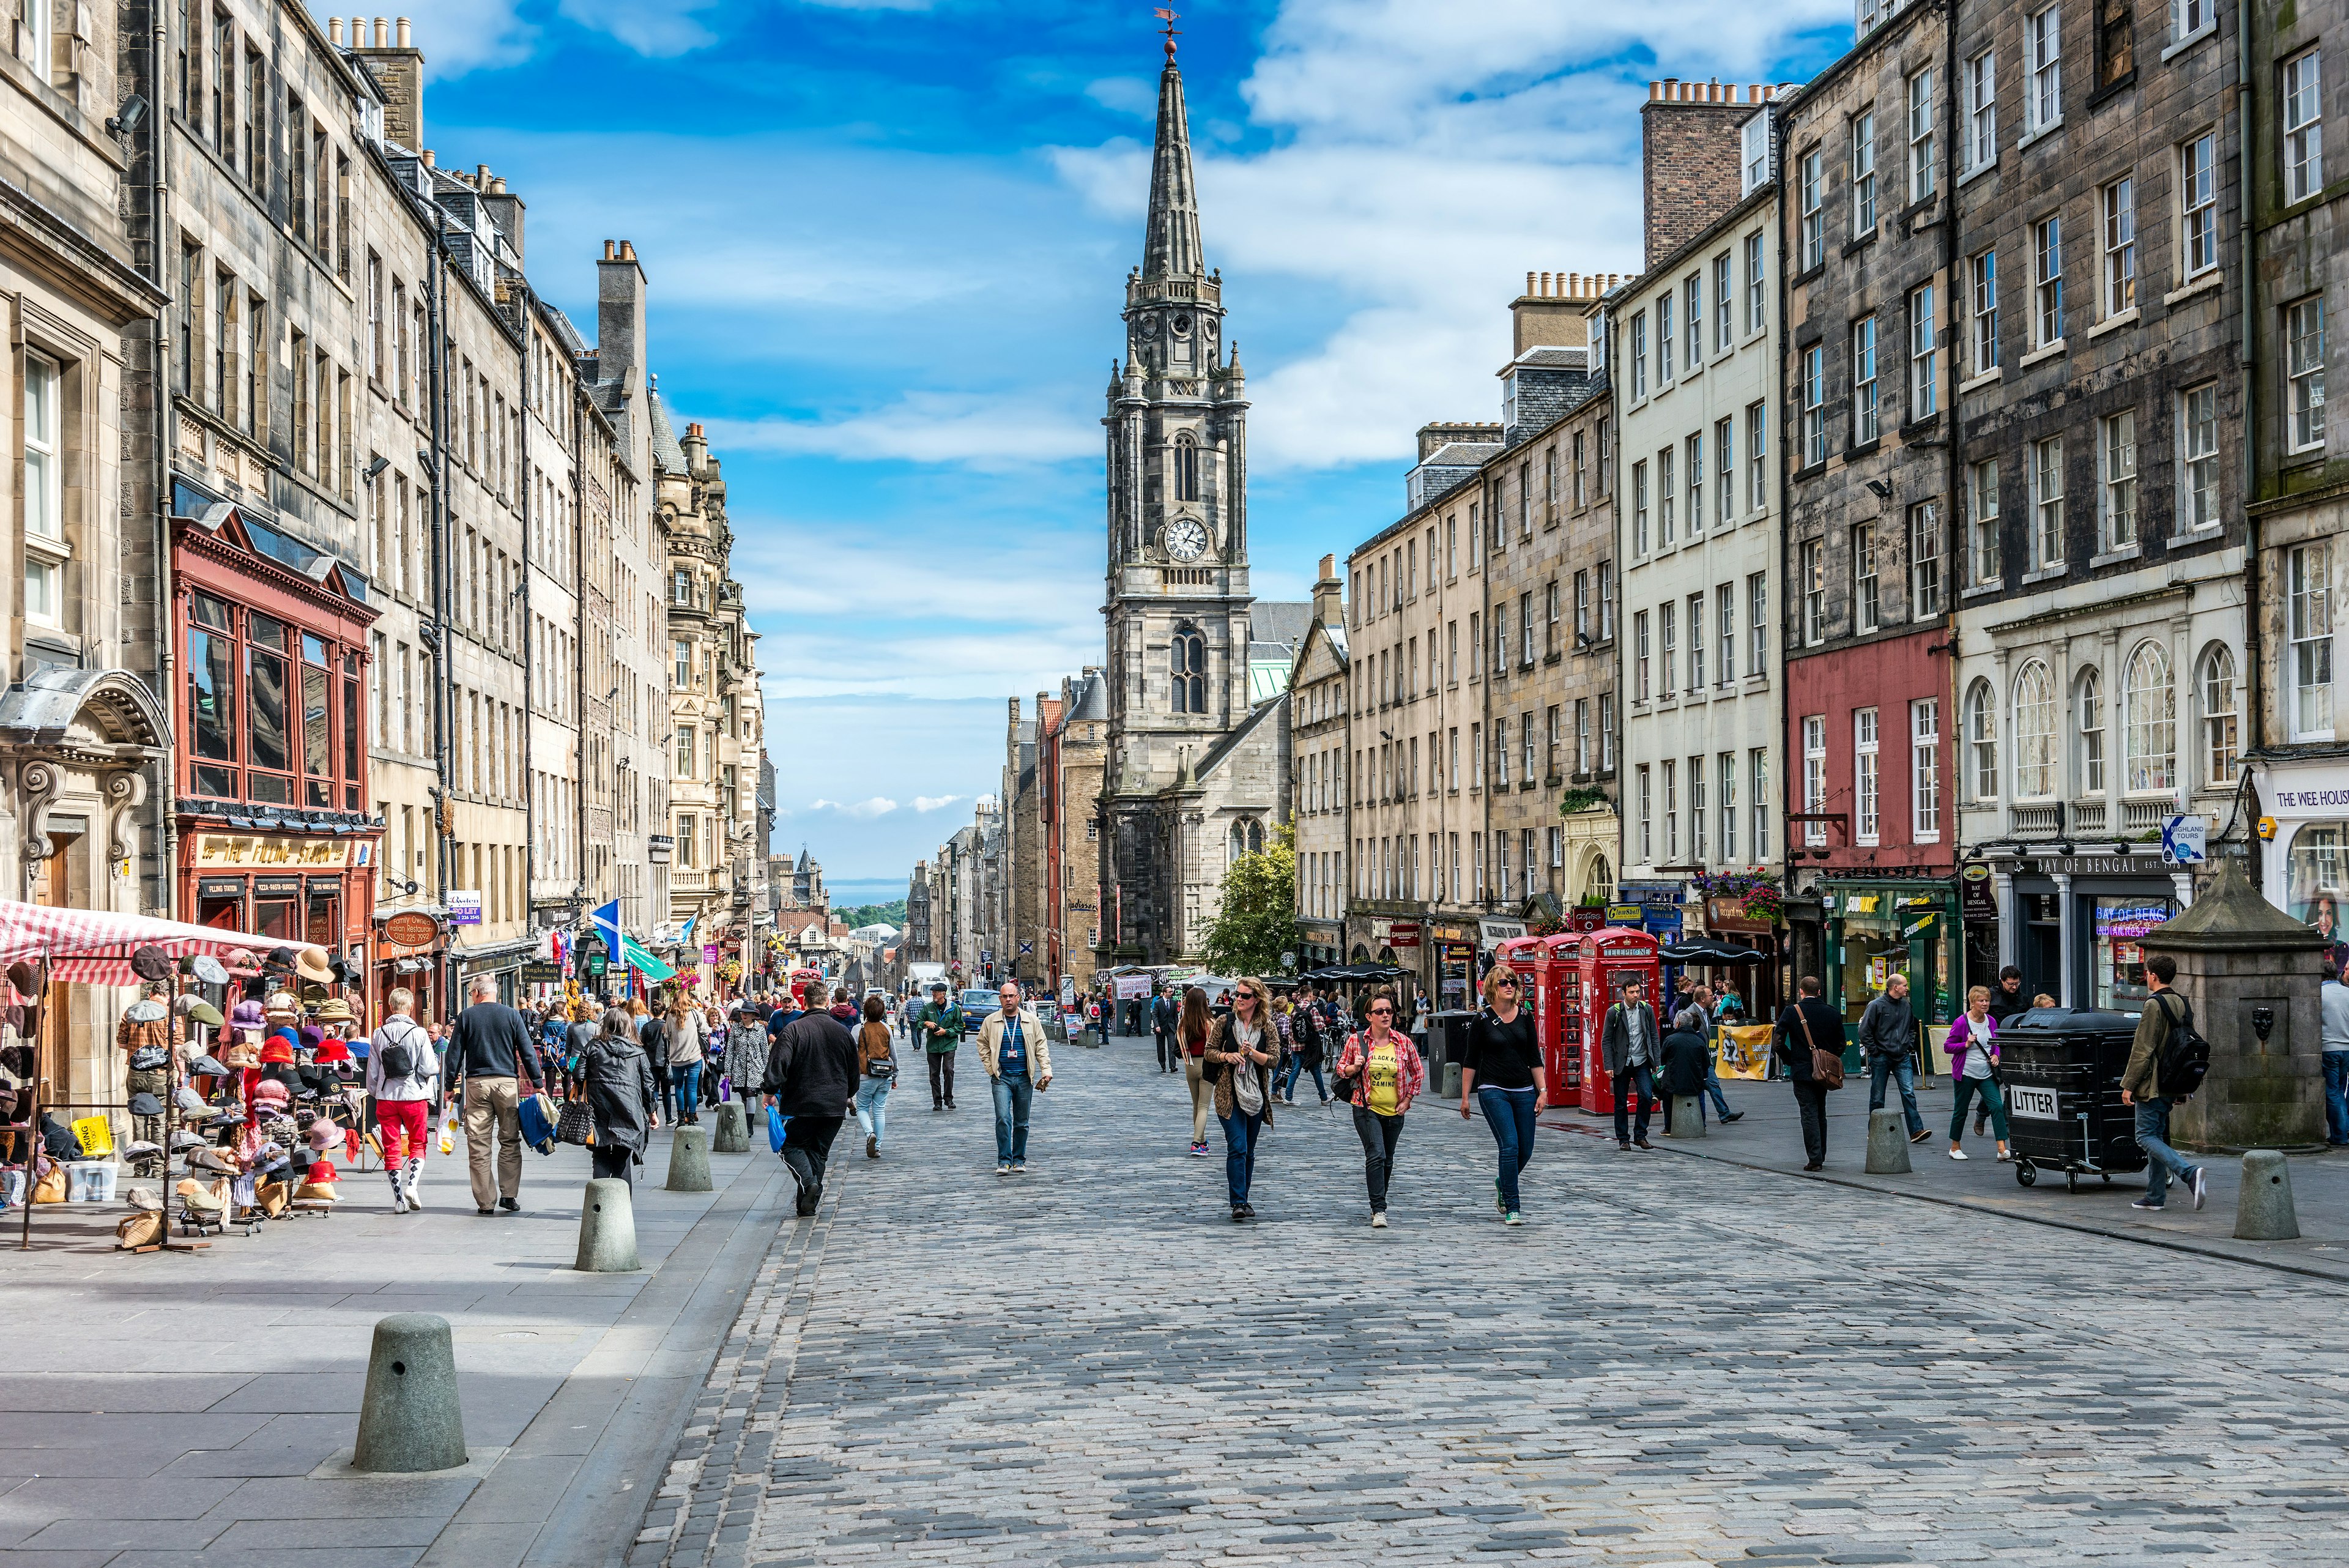 EDINBURGH, SCOTLAND - SEPTEMBER 09, 2013: Edinburgh's busy Royal Mile (The Highstreet) is one of the most iconic streets in Scotland and a mayor tourist attraction